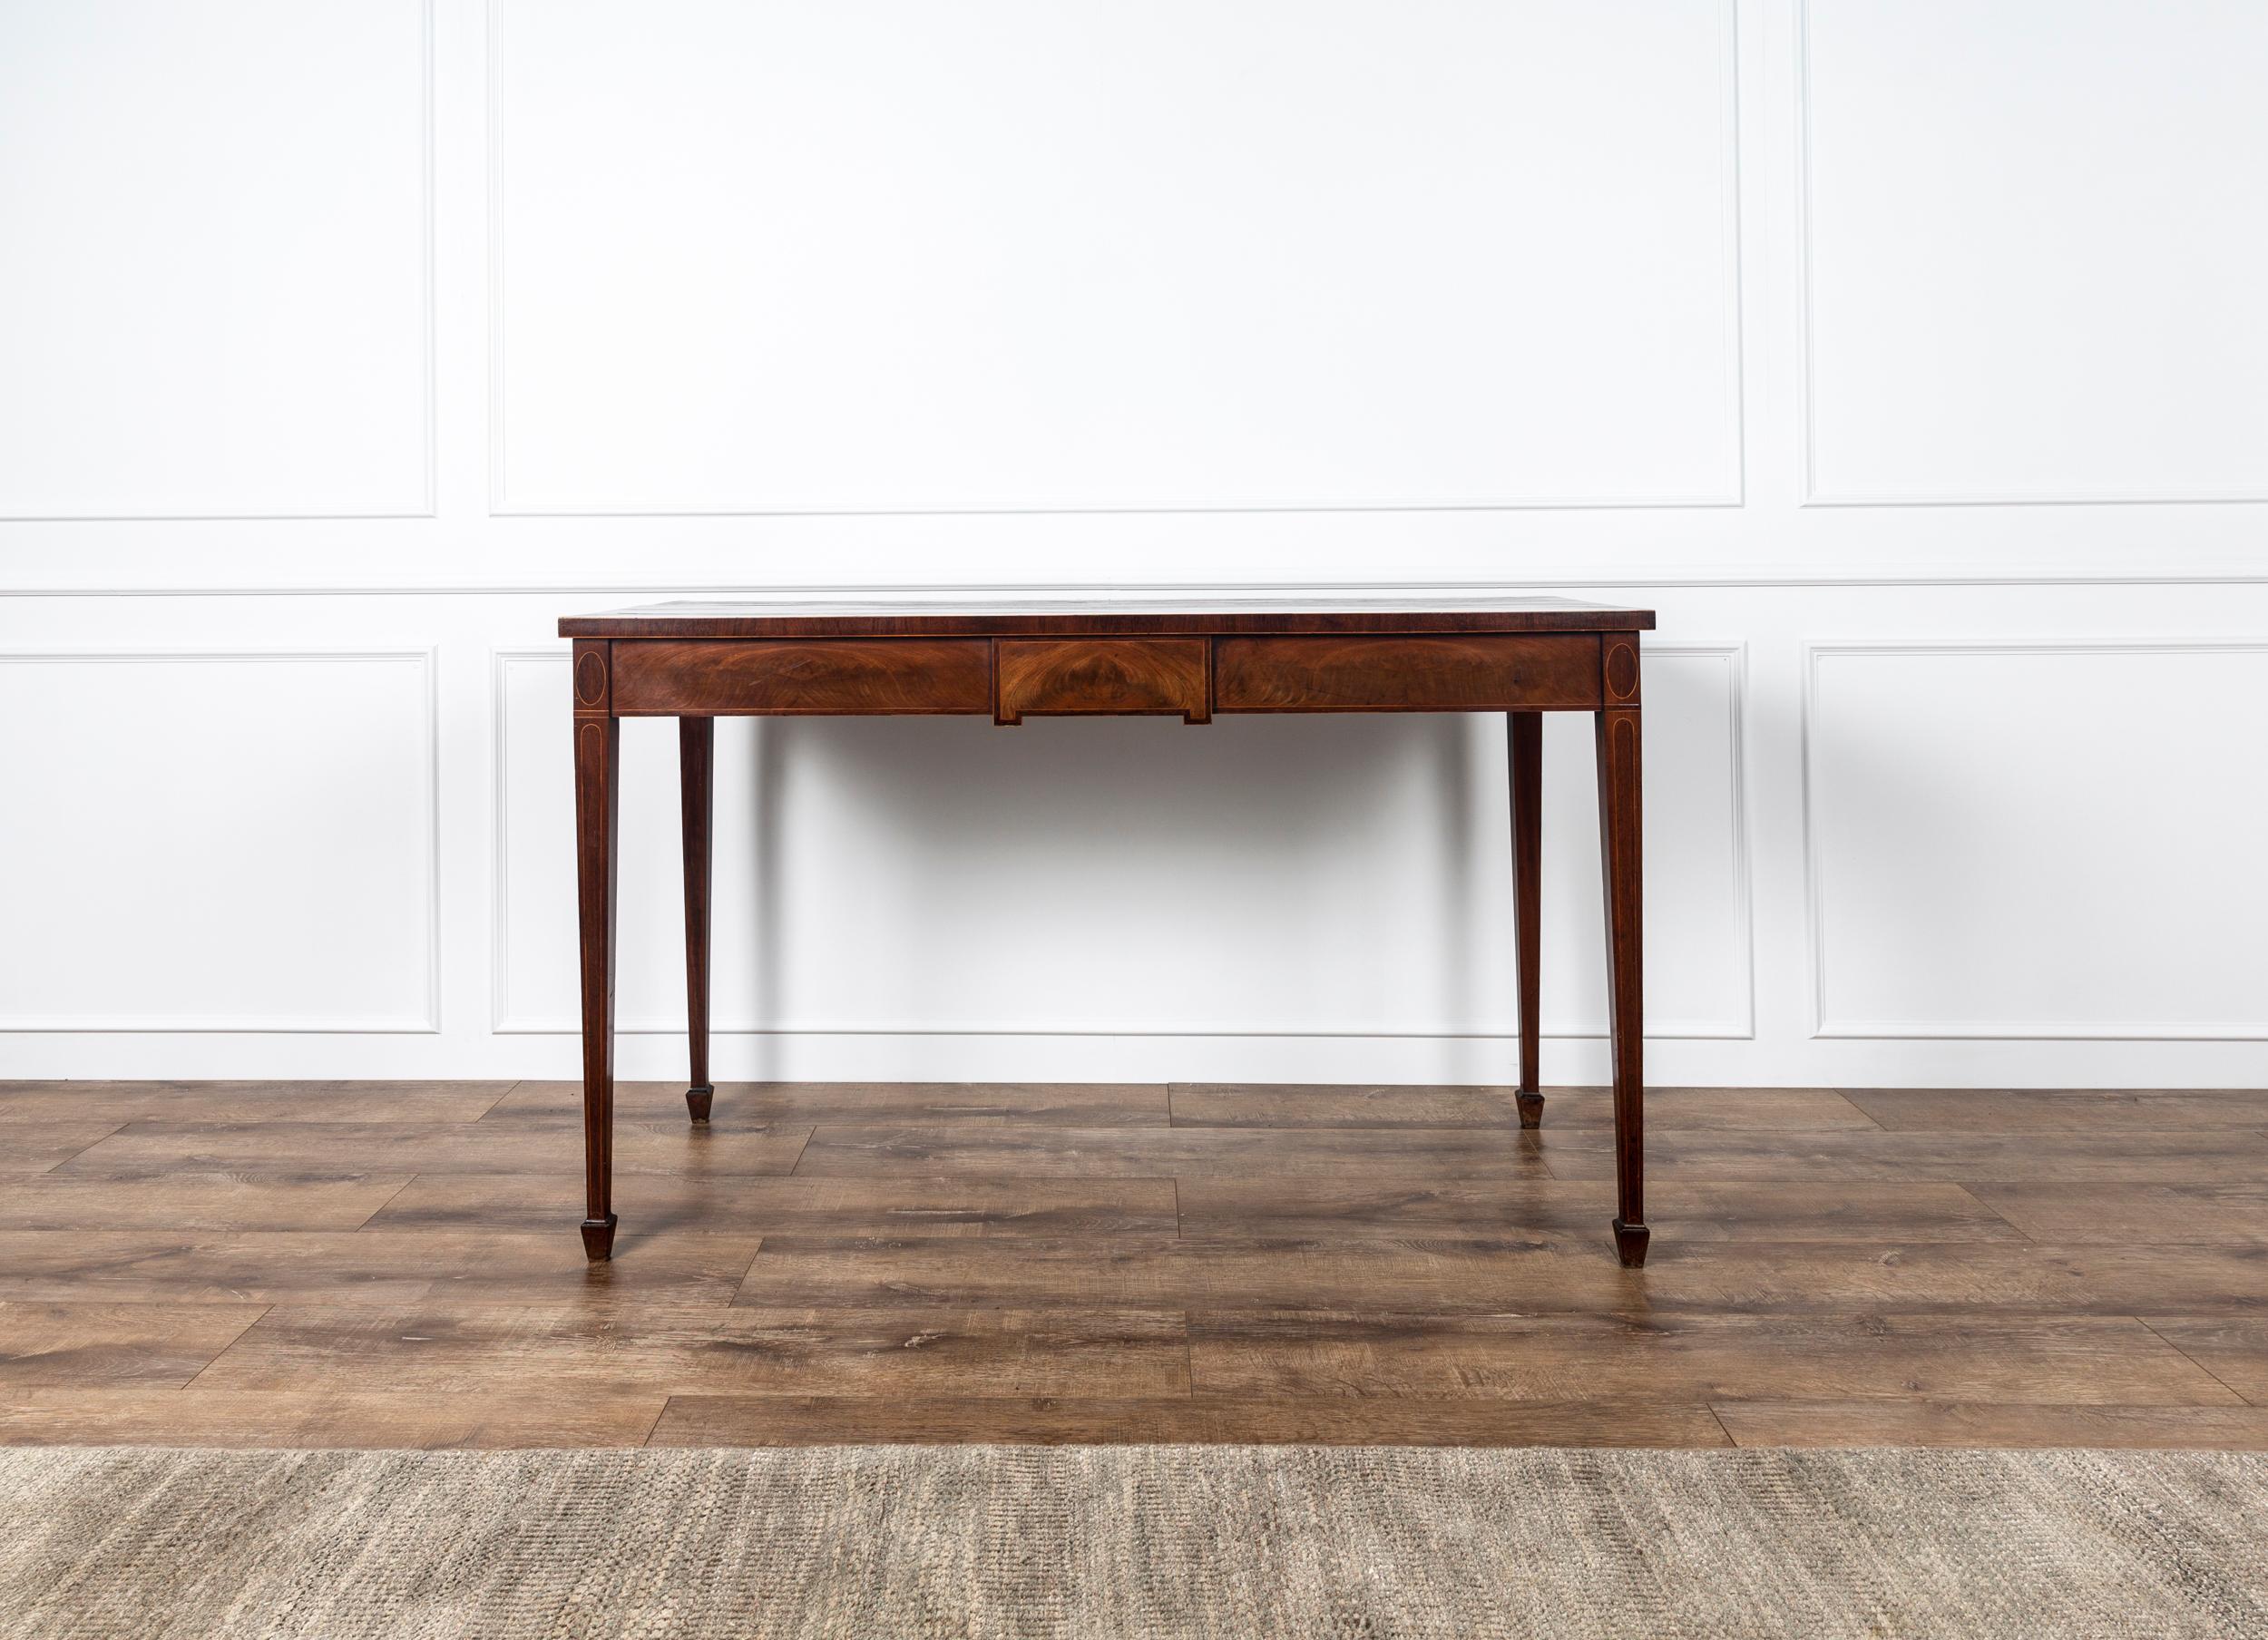 18th Century Sheraton George III mahogany and rosewood serving table.

With an impressive provenance and important Australian historical context, is this very fine quality George III Sheraton style rosewood cross banded mahogany serving